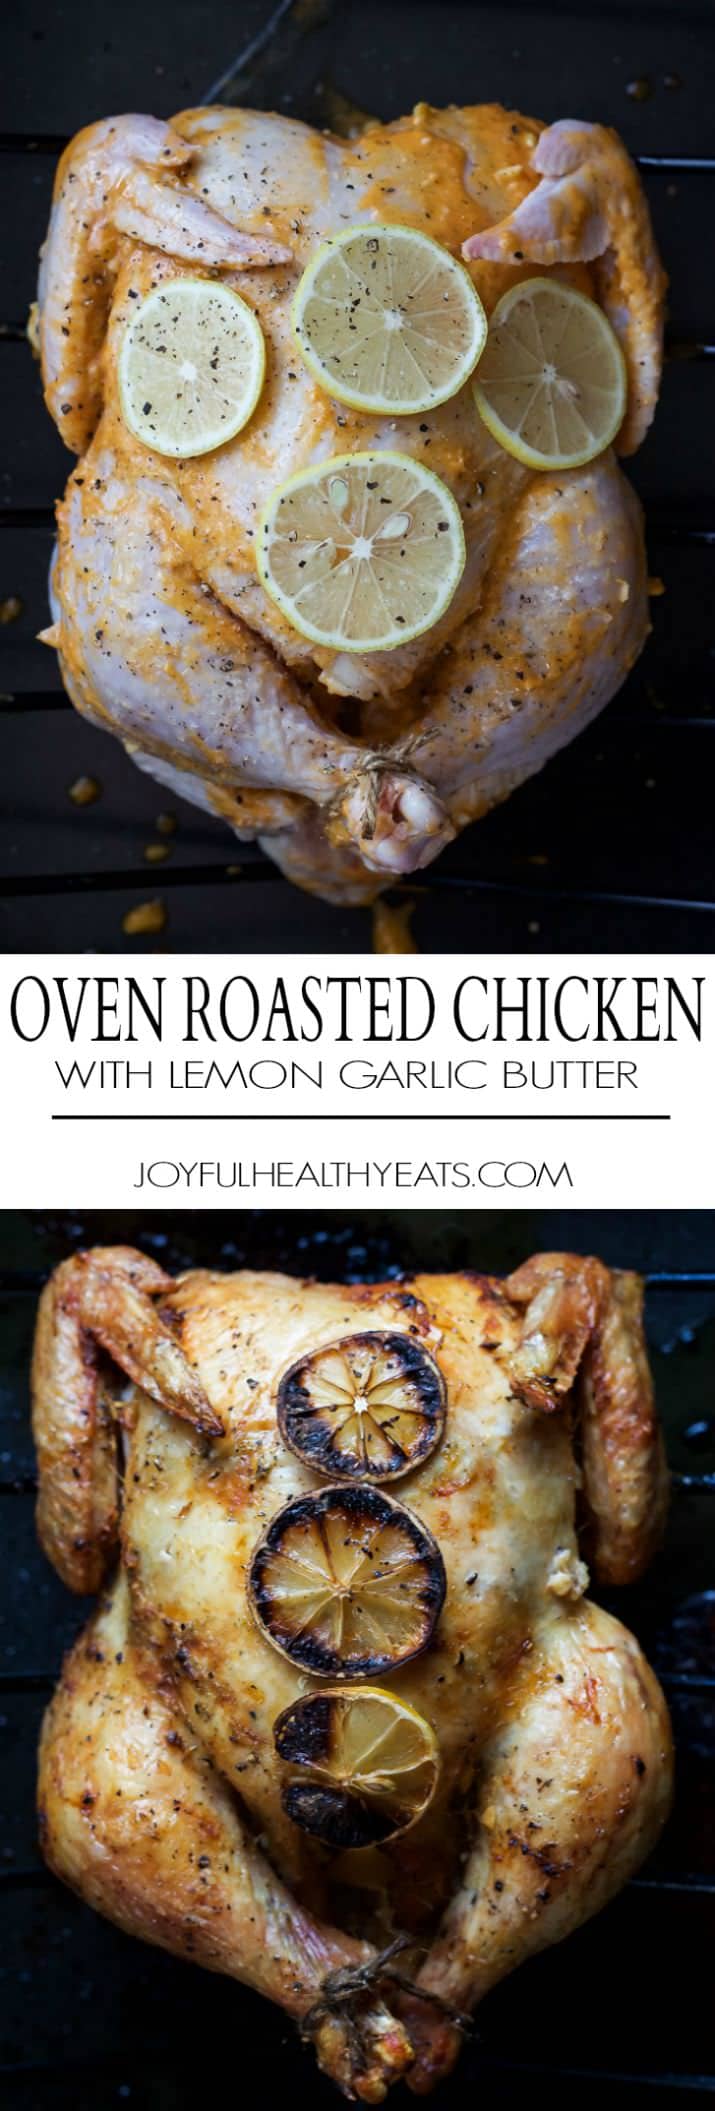 Forget grilled chicken! You'll love the crispy crust and smoky lemon garlic butter of this oven roasted chicken recipe for an easy, gluten-free, Paleo weeknight dinner the whole family will love!  | Happy and Healthyyeats.com